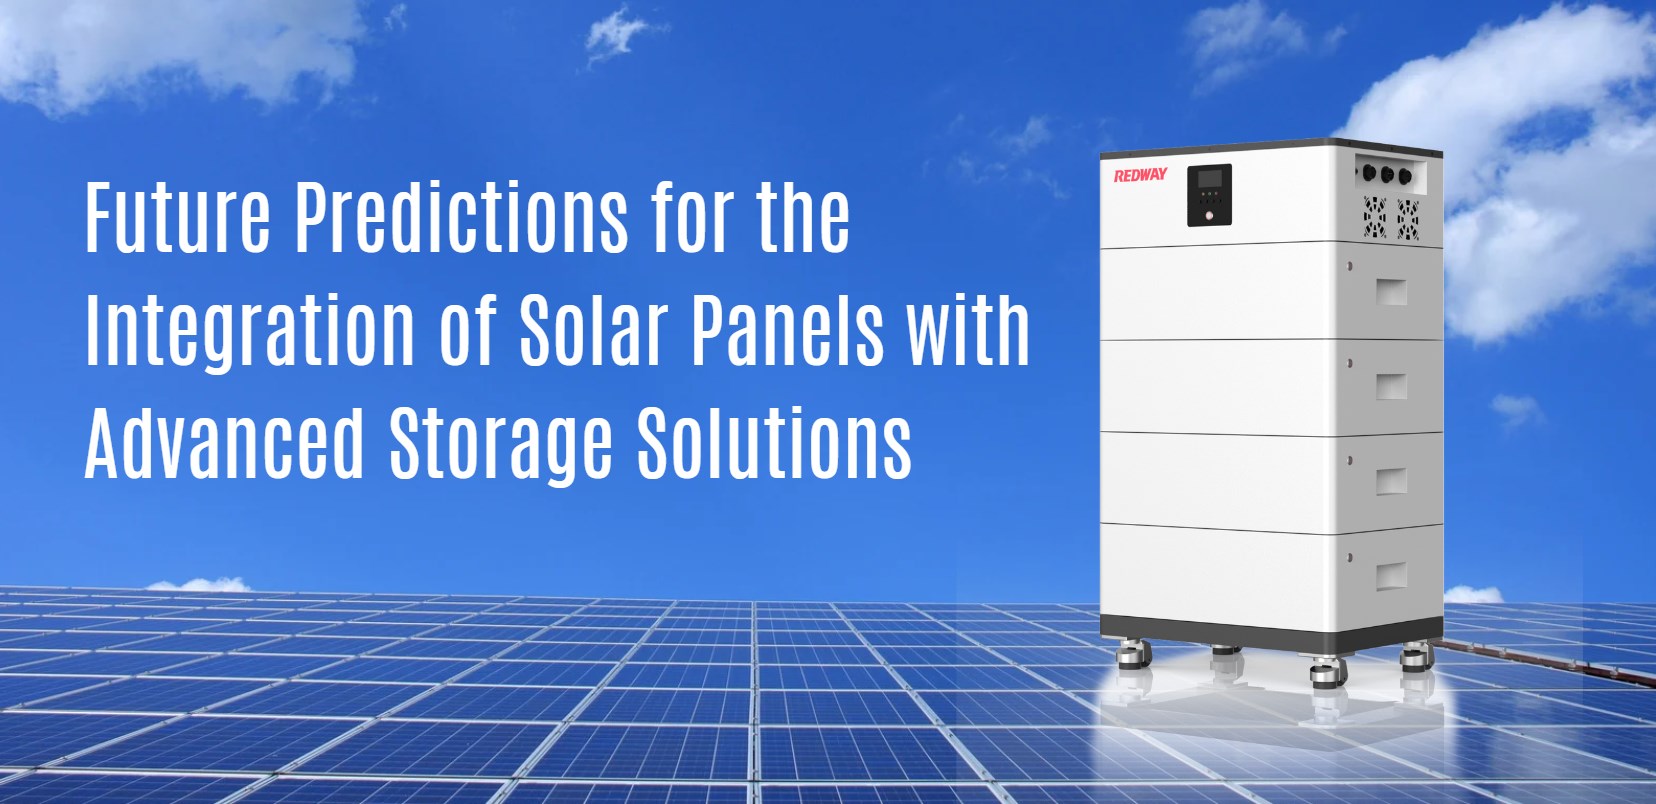 Future Predictions for the Integration of Solar Panels with Advanced Storage Solutions